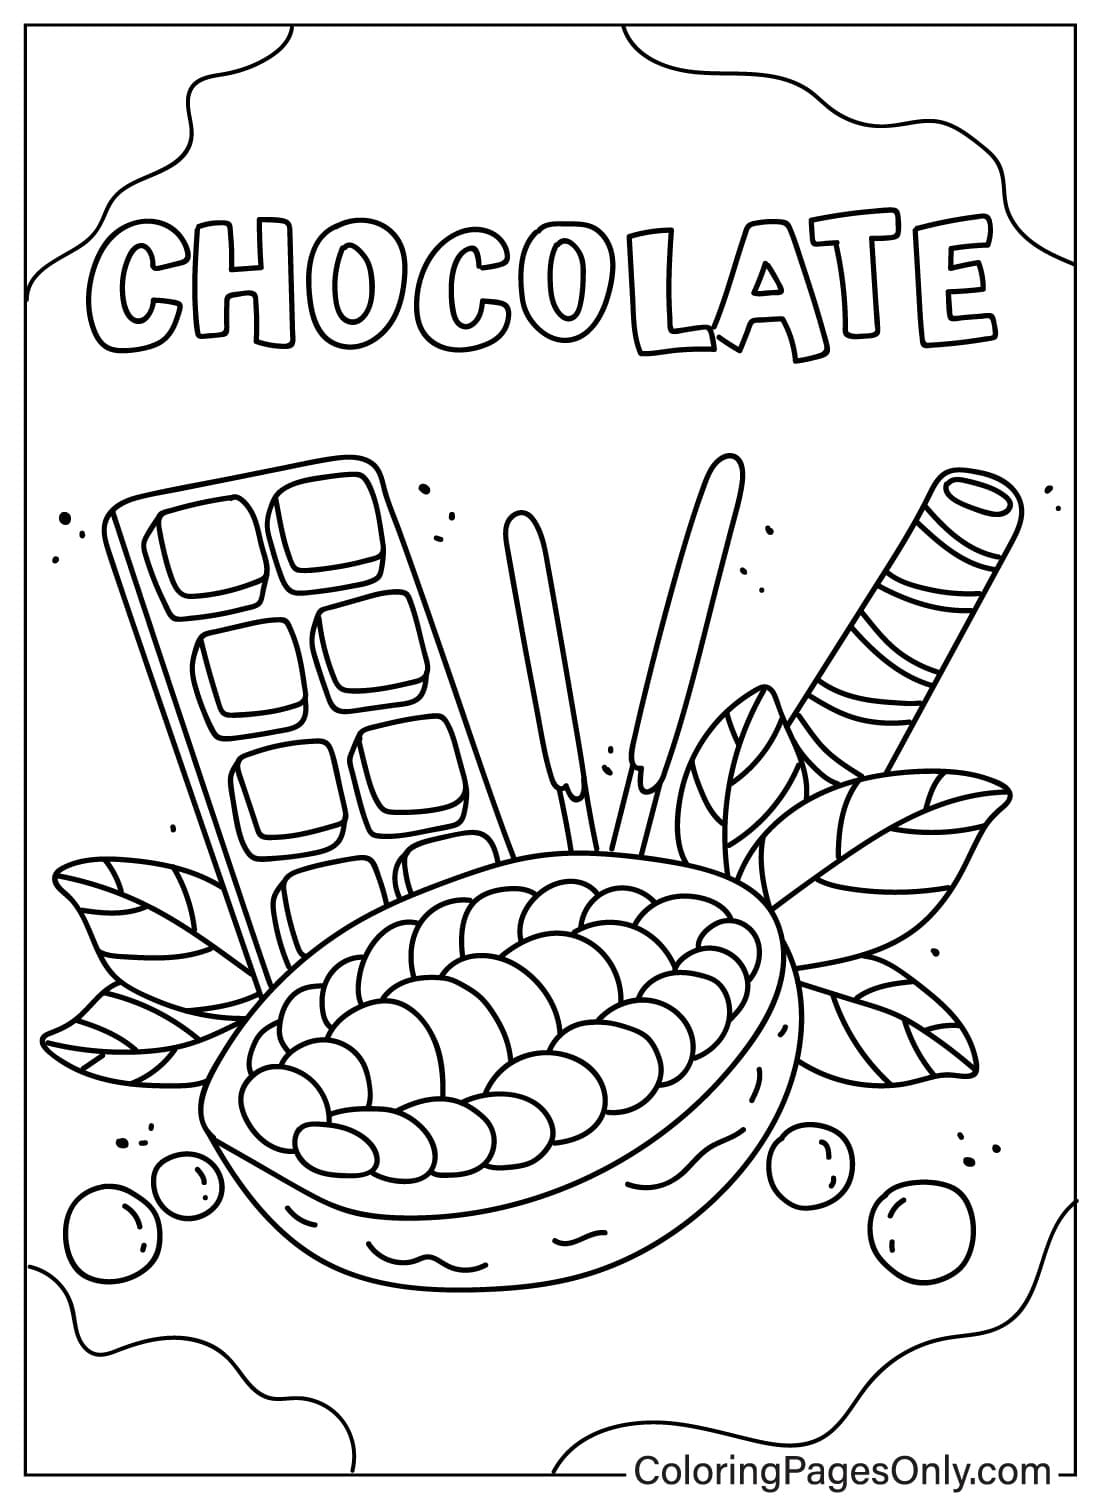 Chocolate Drawing Coloring Page from Chocolate